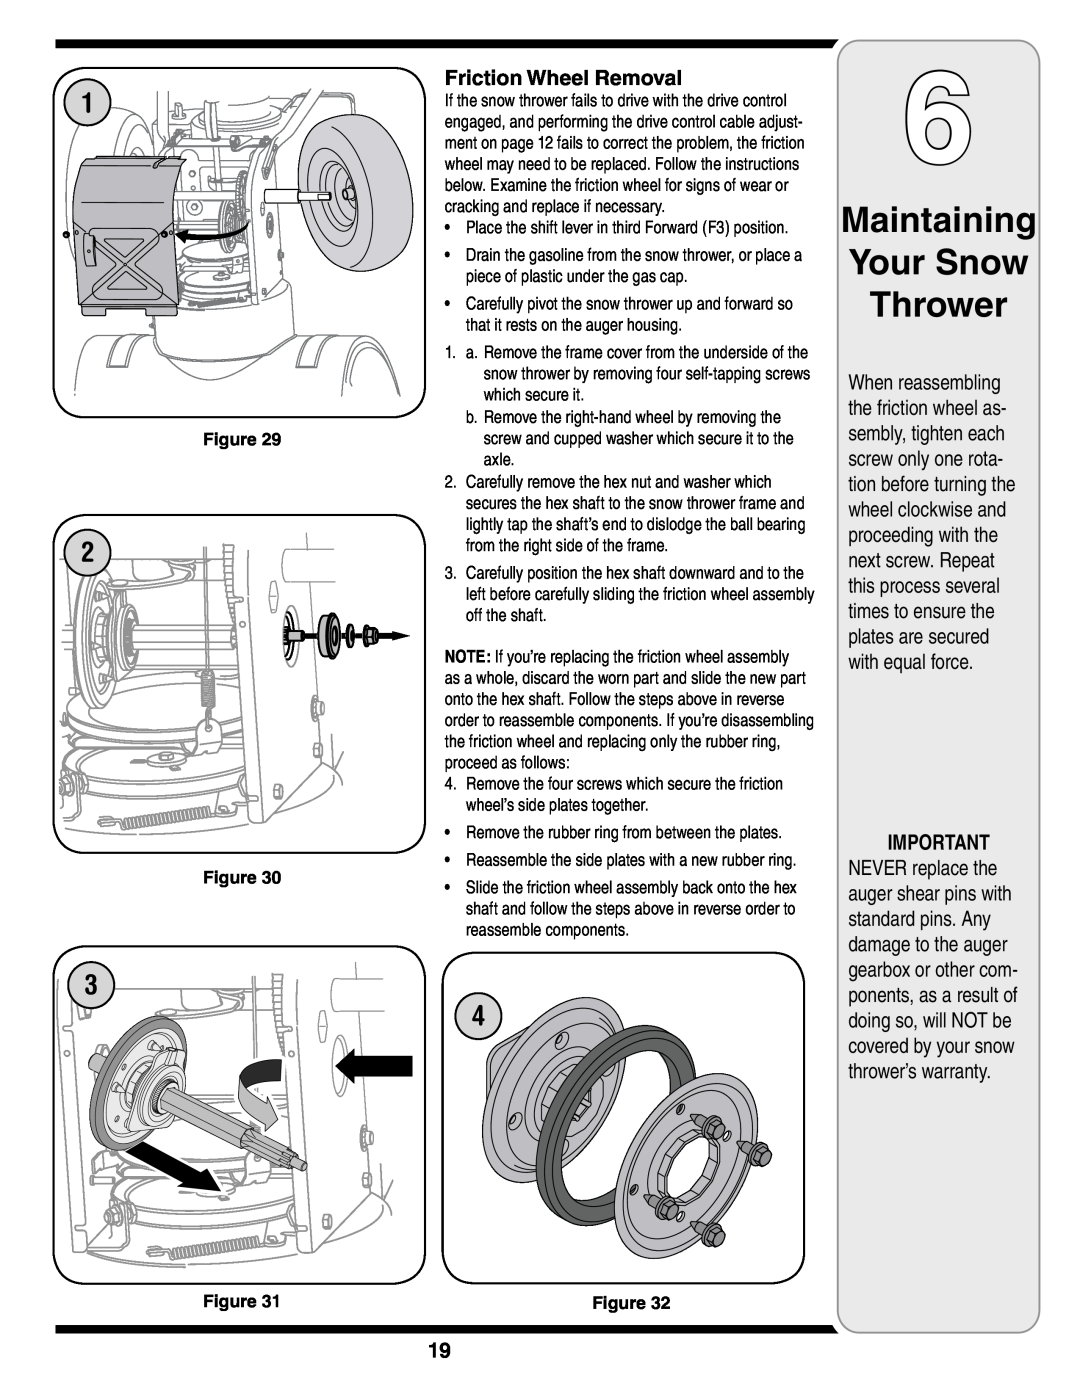 Troy-Bilt Two-Stage Snow Thrower warranty Maintaining Your Snow Thrower, Friction Wheel Removal 